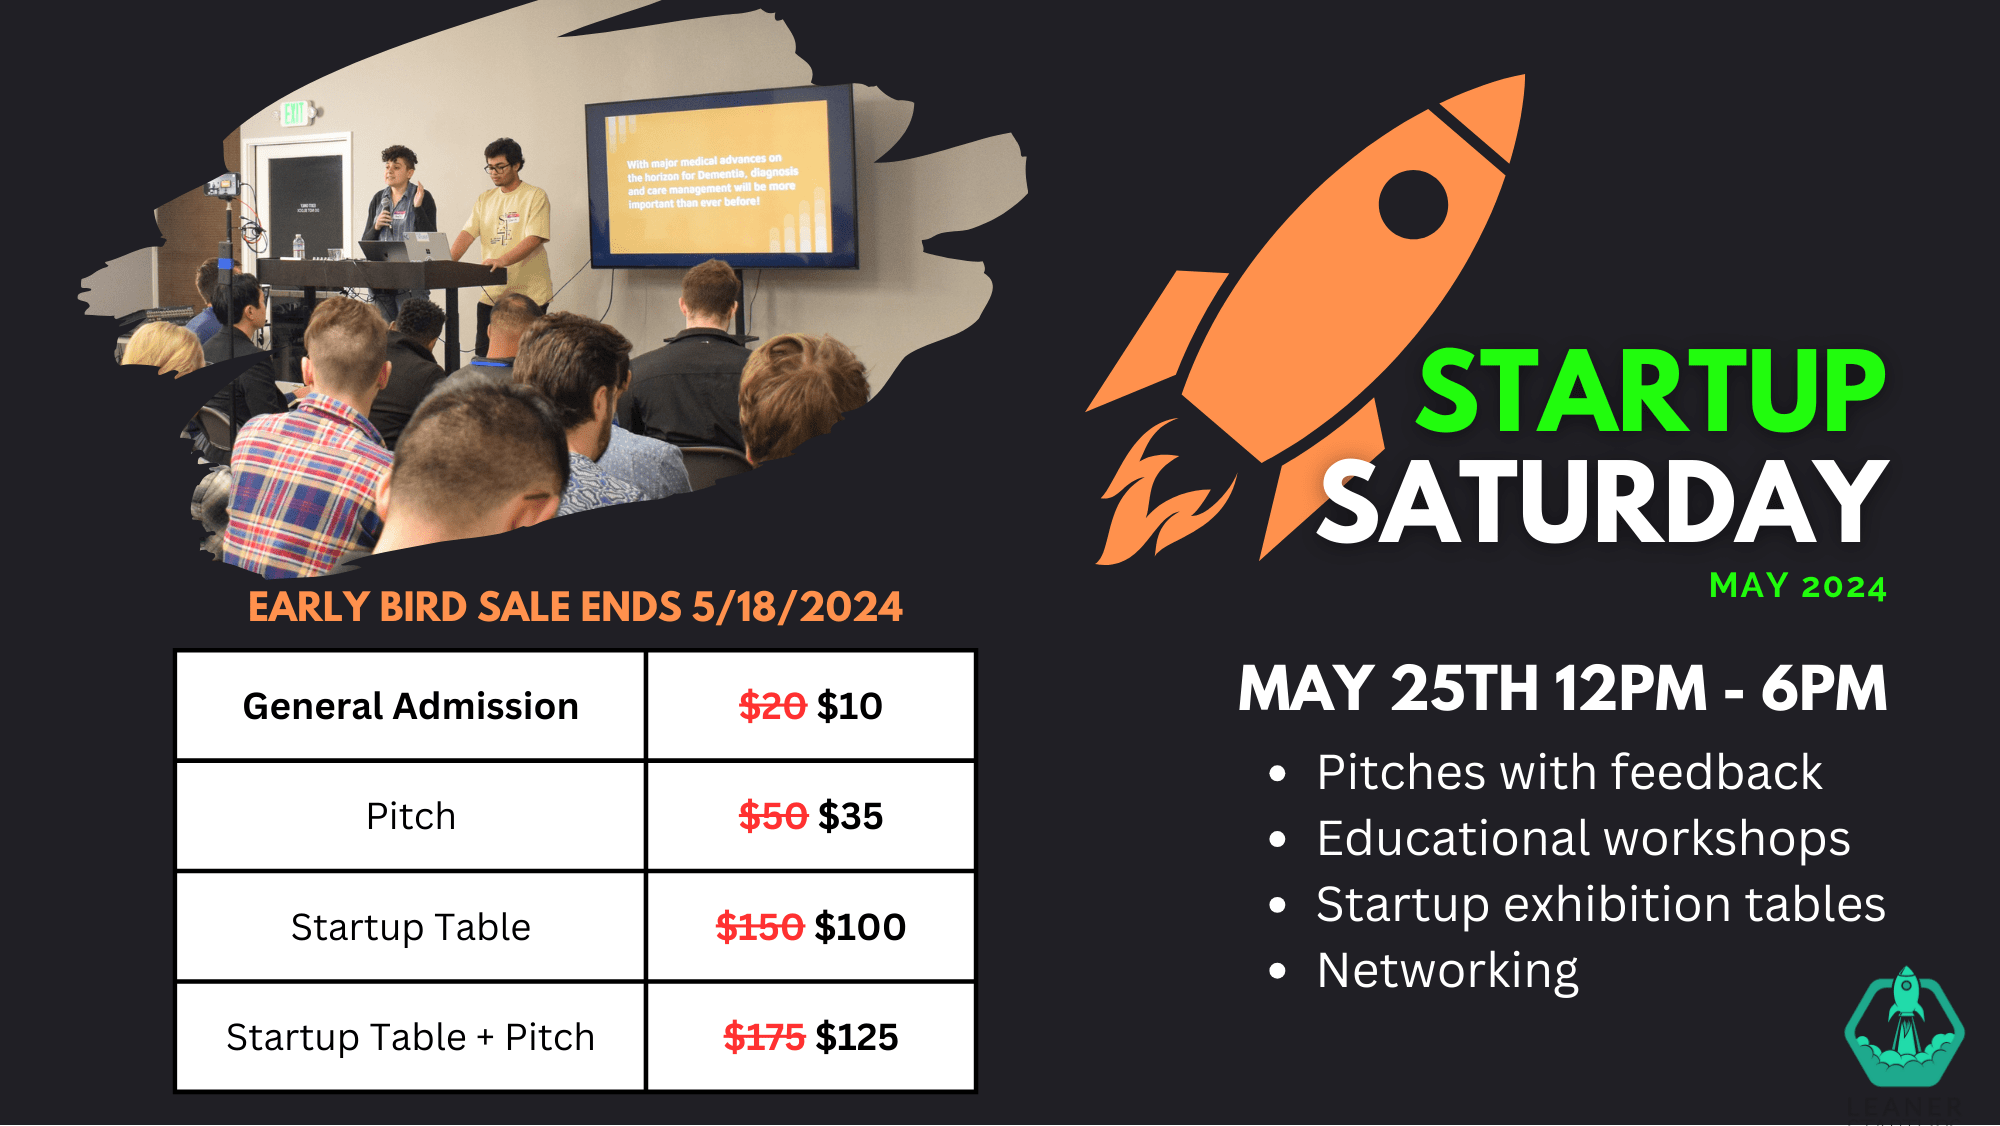 Startup Saturday May 2024 Event Image